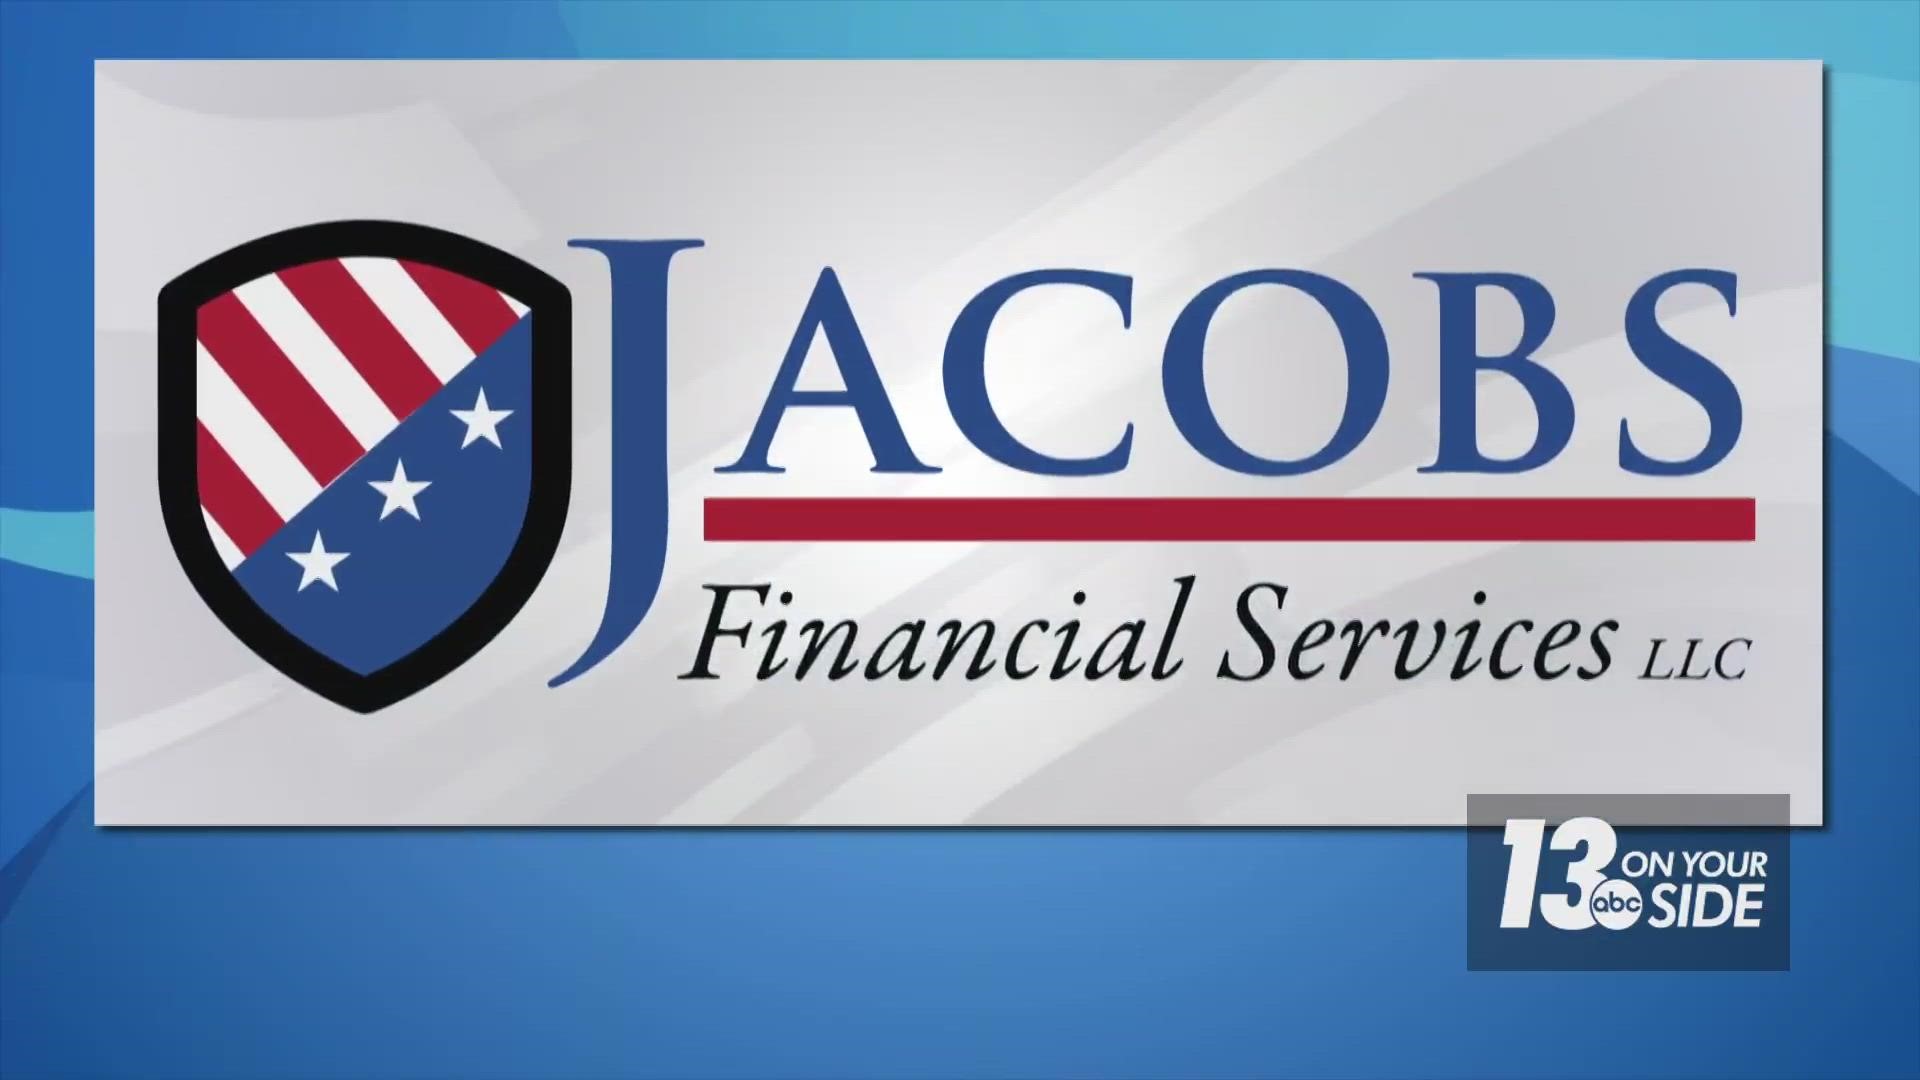 Tom Jacobs is here from Jacobs Financial Services with advice about who should consider shifting AWAY from that 401K.